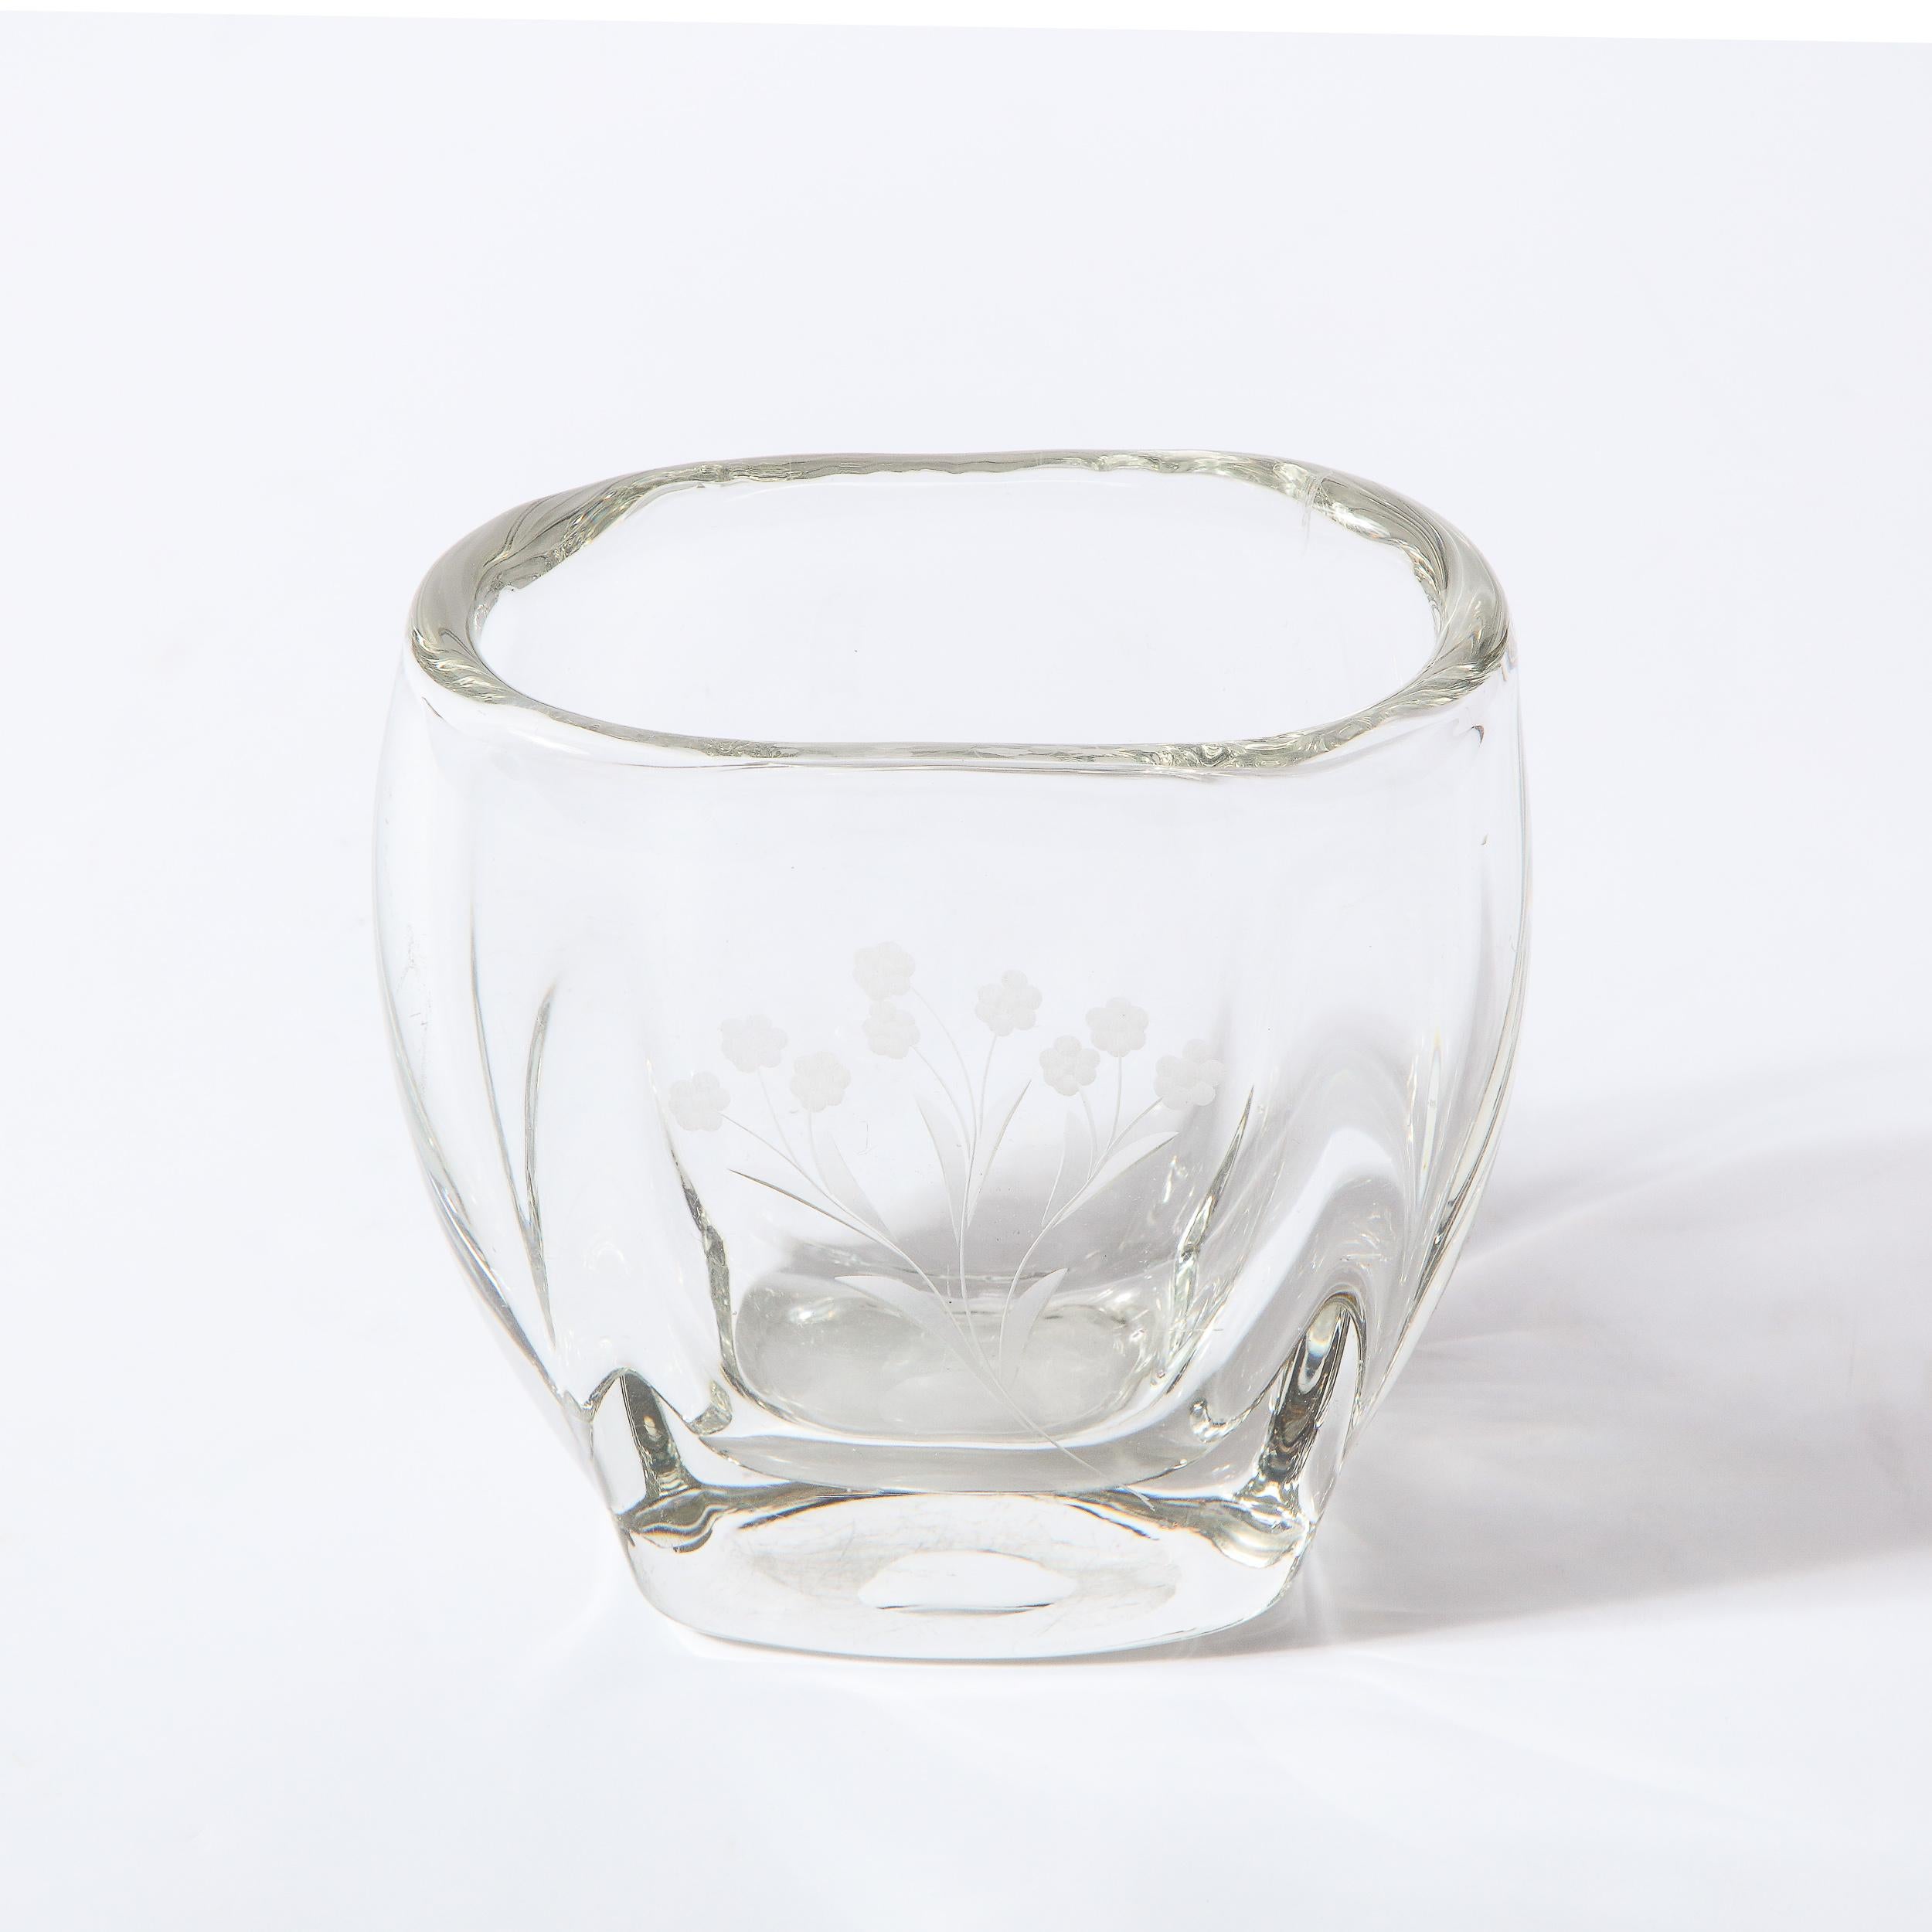 This stunning Mid-Century Modern vase was realized in Sweden circa 1960. It features an ovoid mouth and a rounded body in translucent glass with a stylized floral motif etched in frosted glass onto one side. With its clean modernist lines and